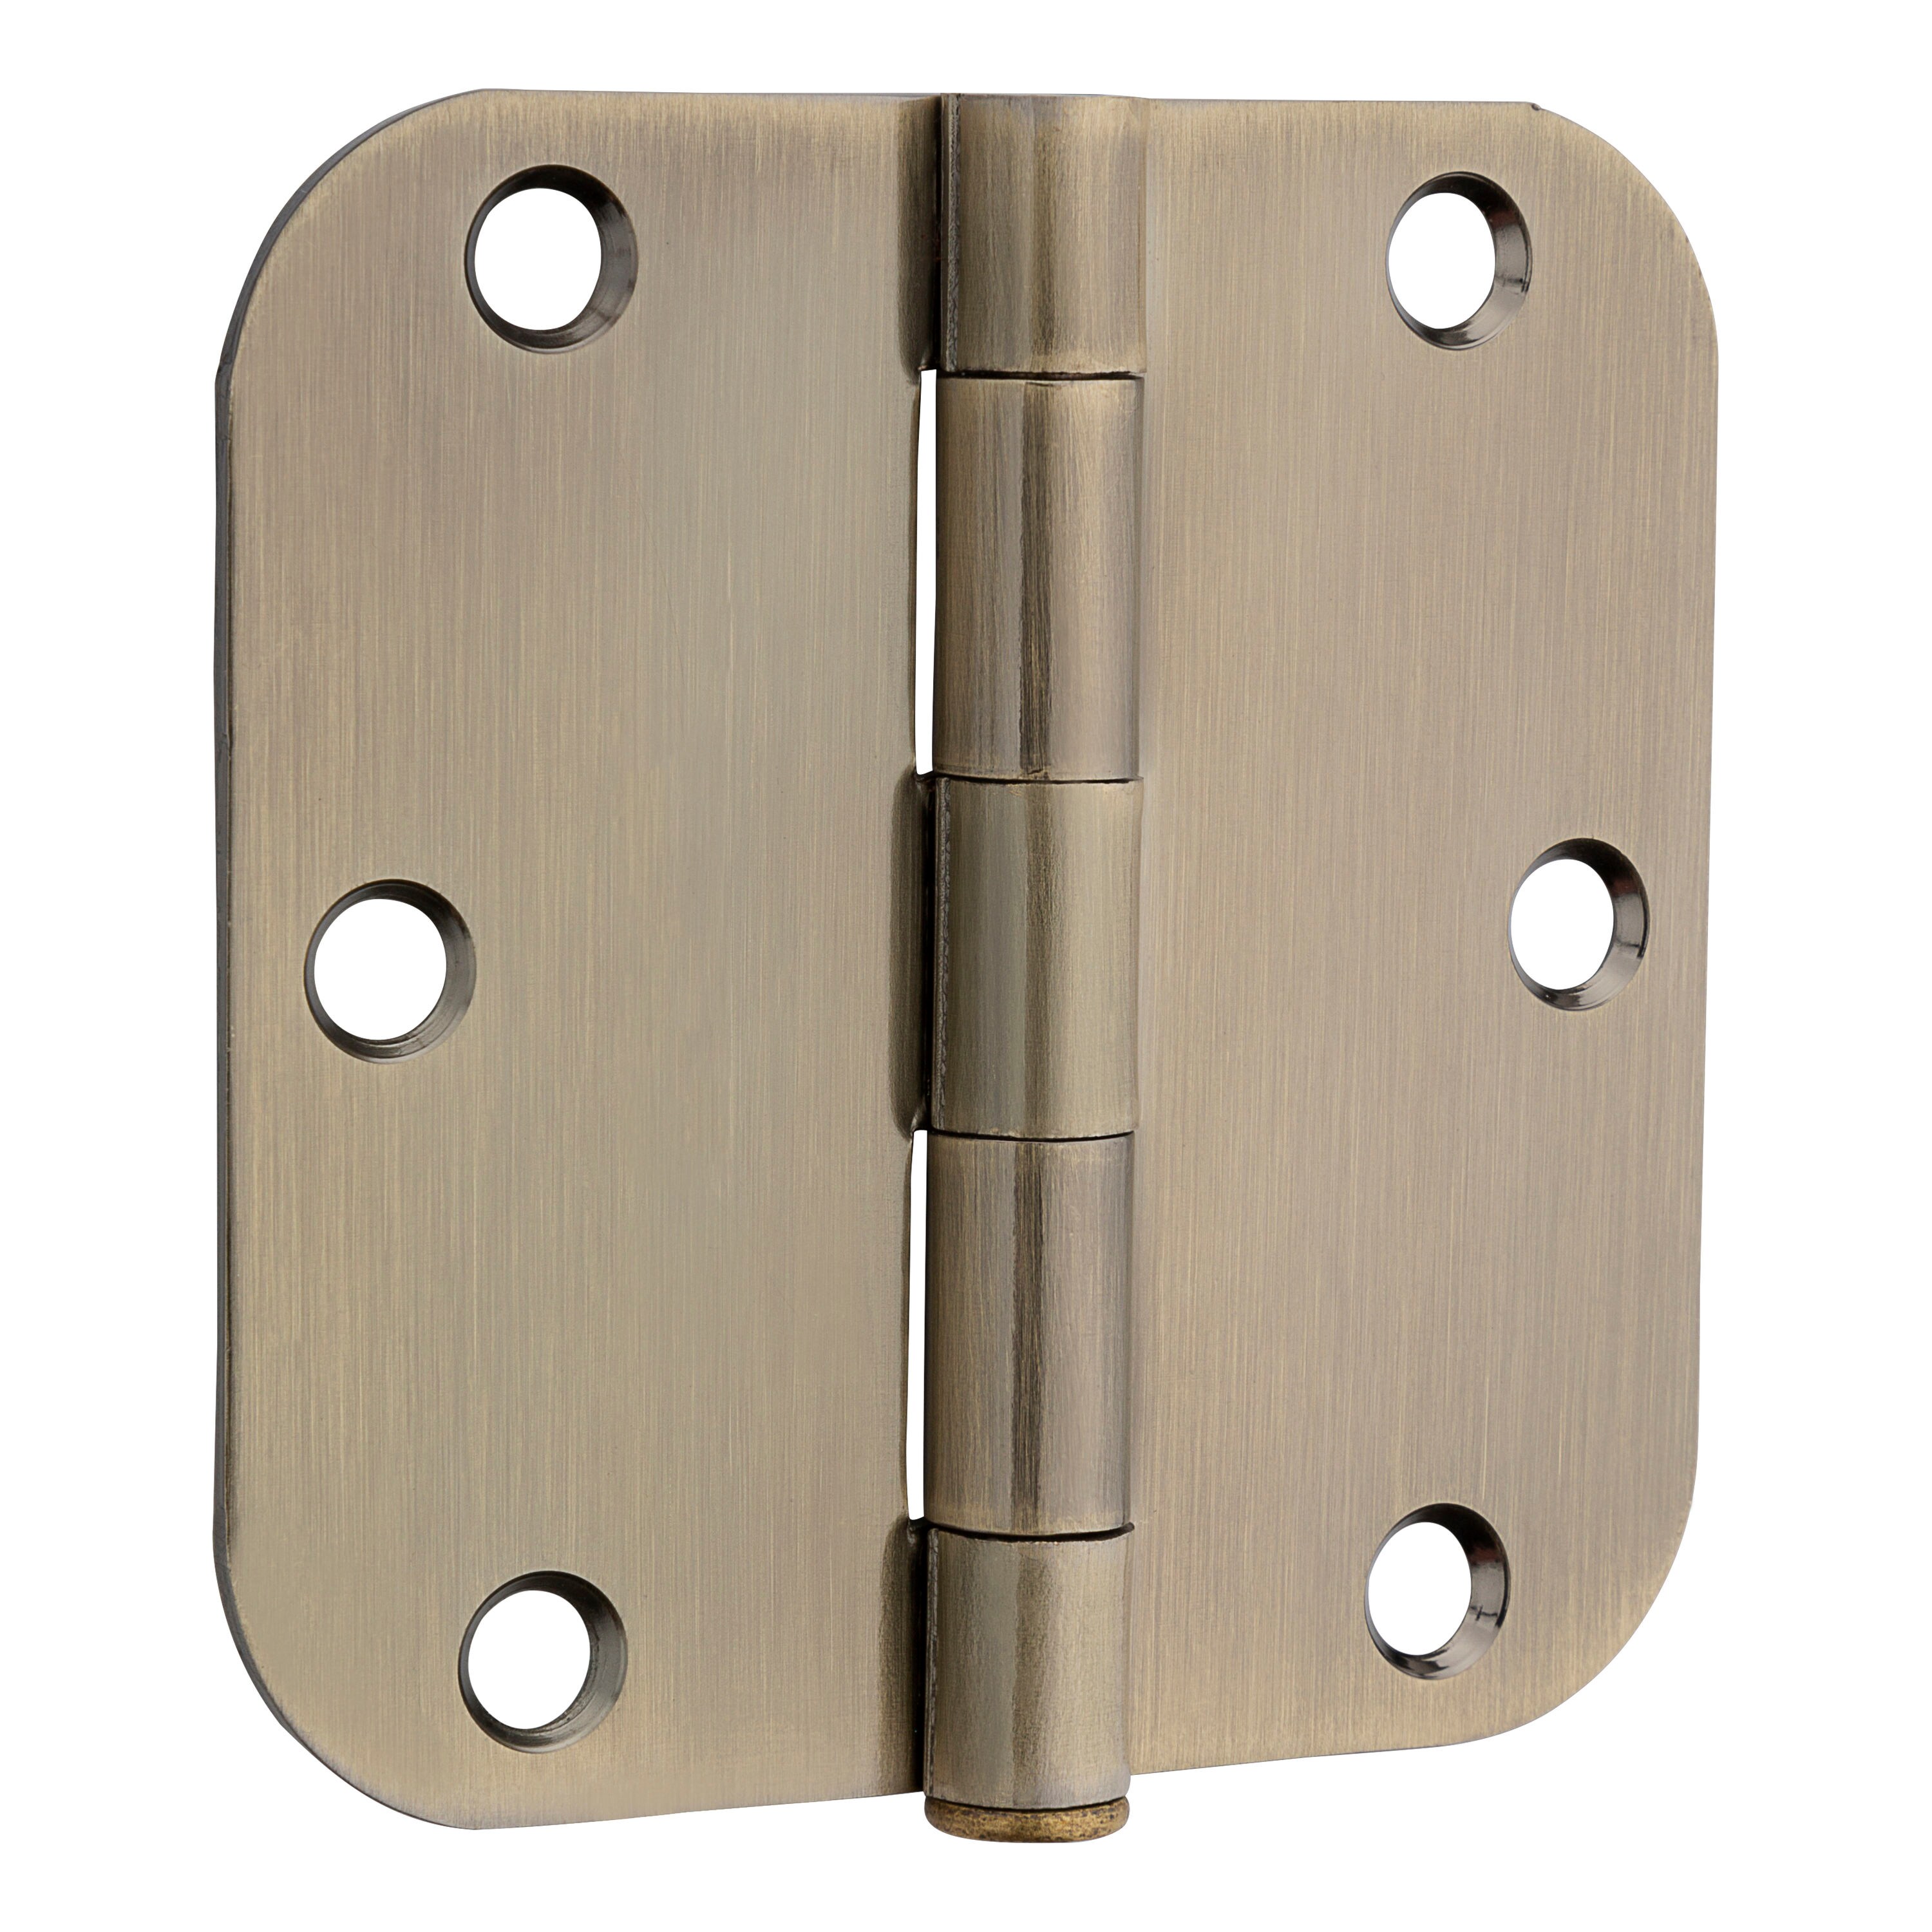 Polished Brass Finish Hinges Solid Brass 3 1/2" x 3 1/2" with 5/8" radius corner 